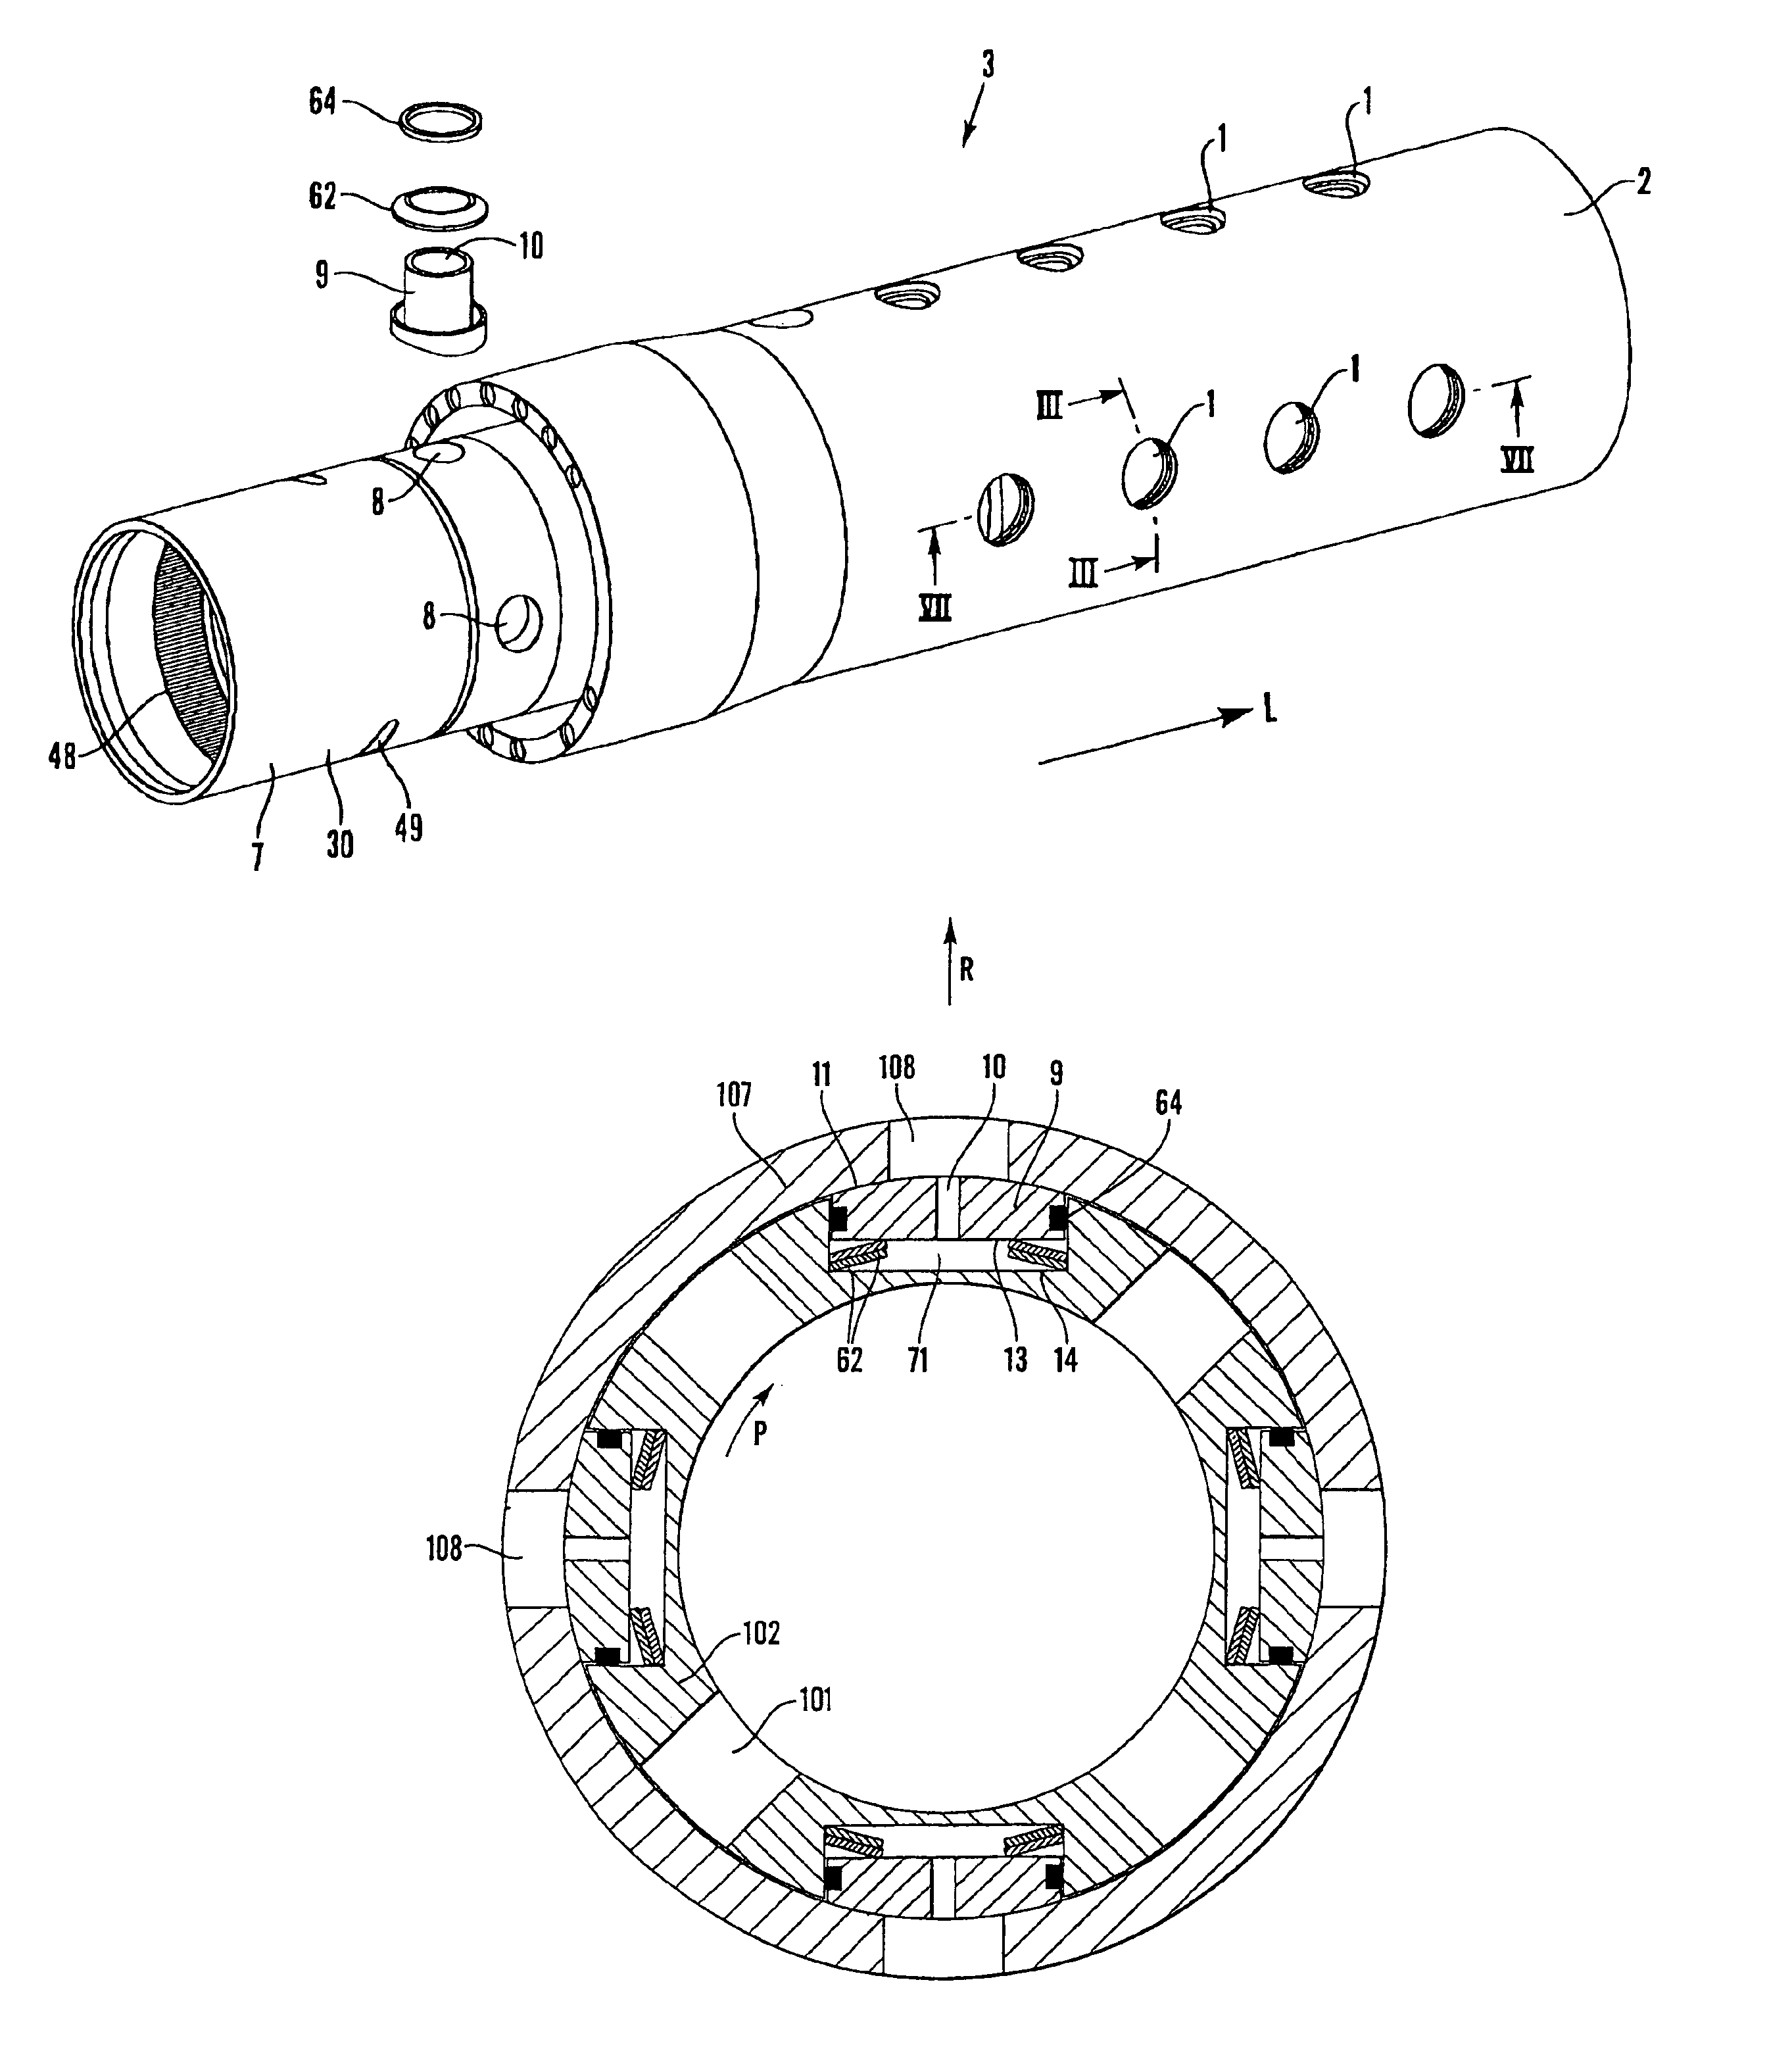 Sleeve valve for controlling fluid flow between a hydrocarbon reservoir and tubing in a well and method for the assembly of a sleeve valve